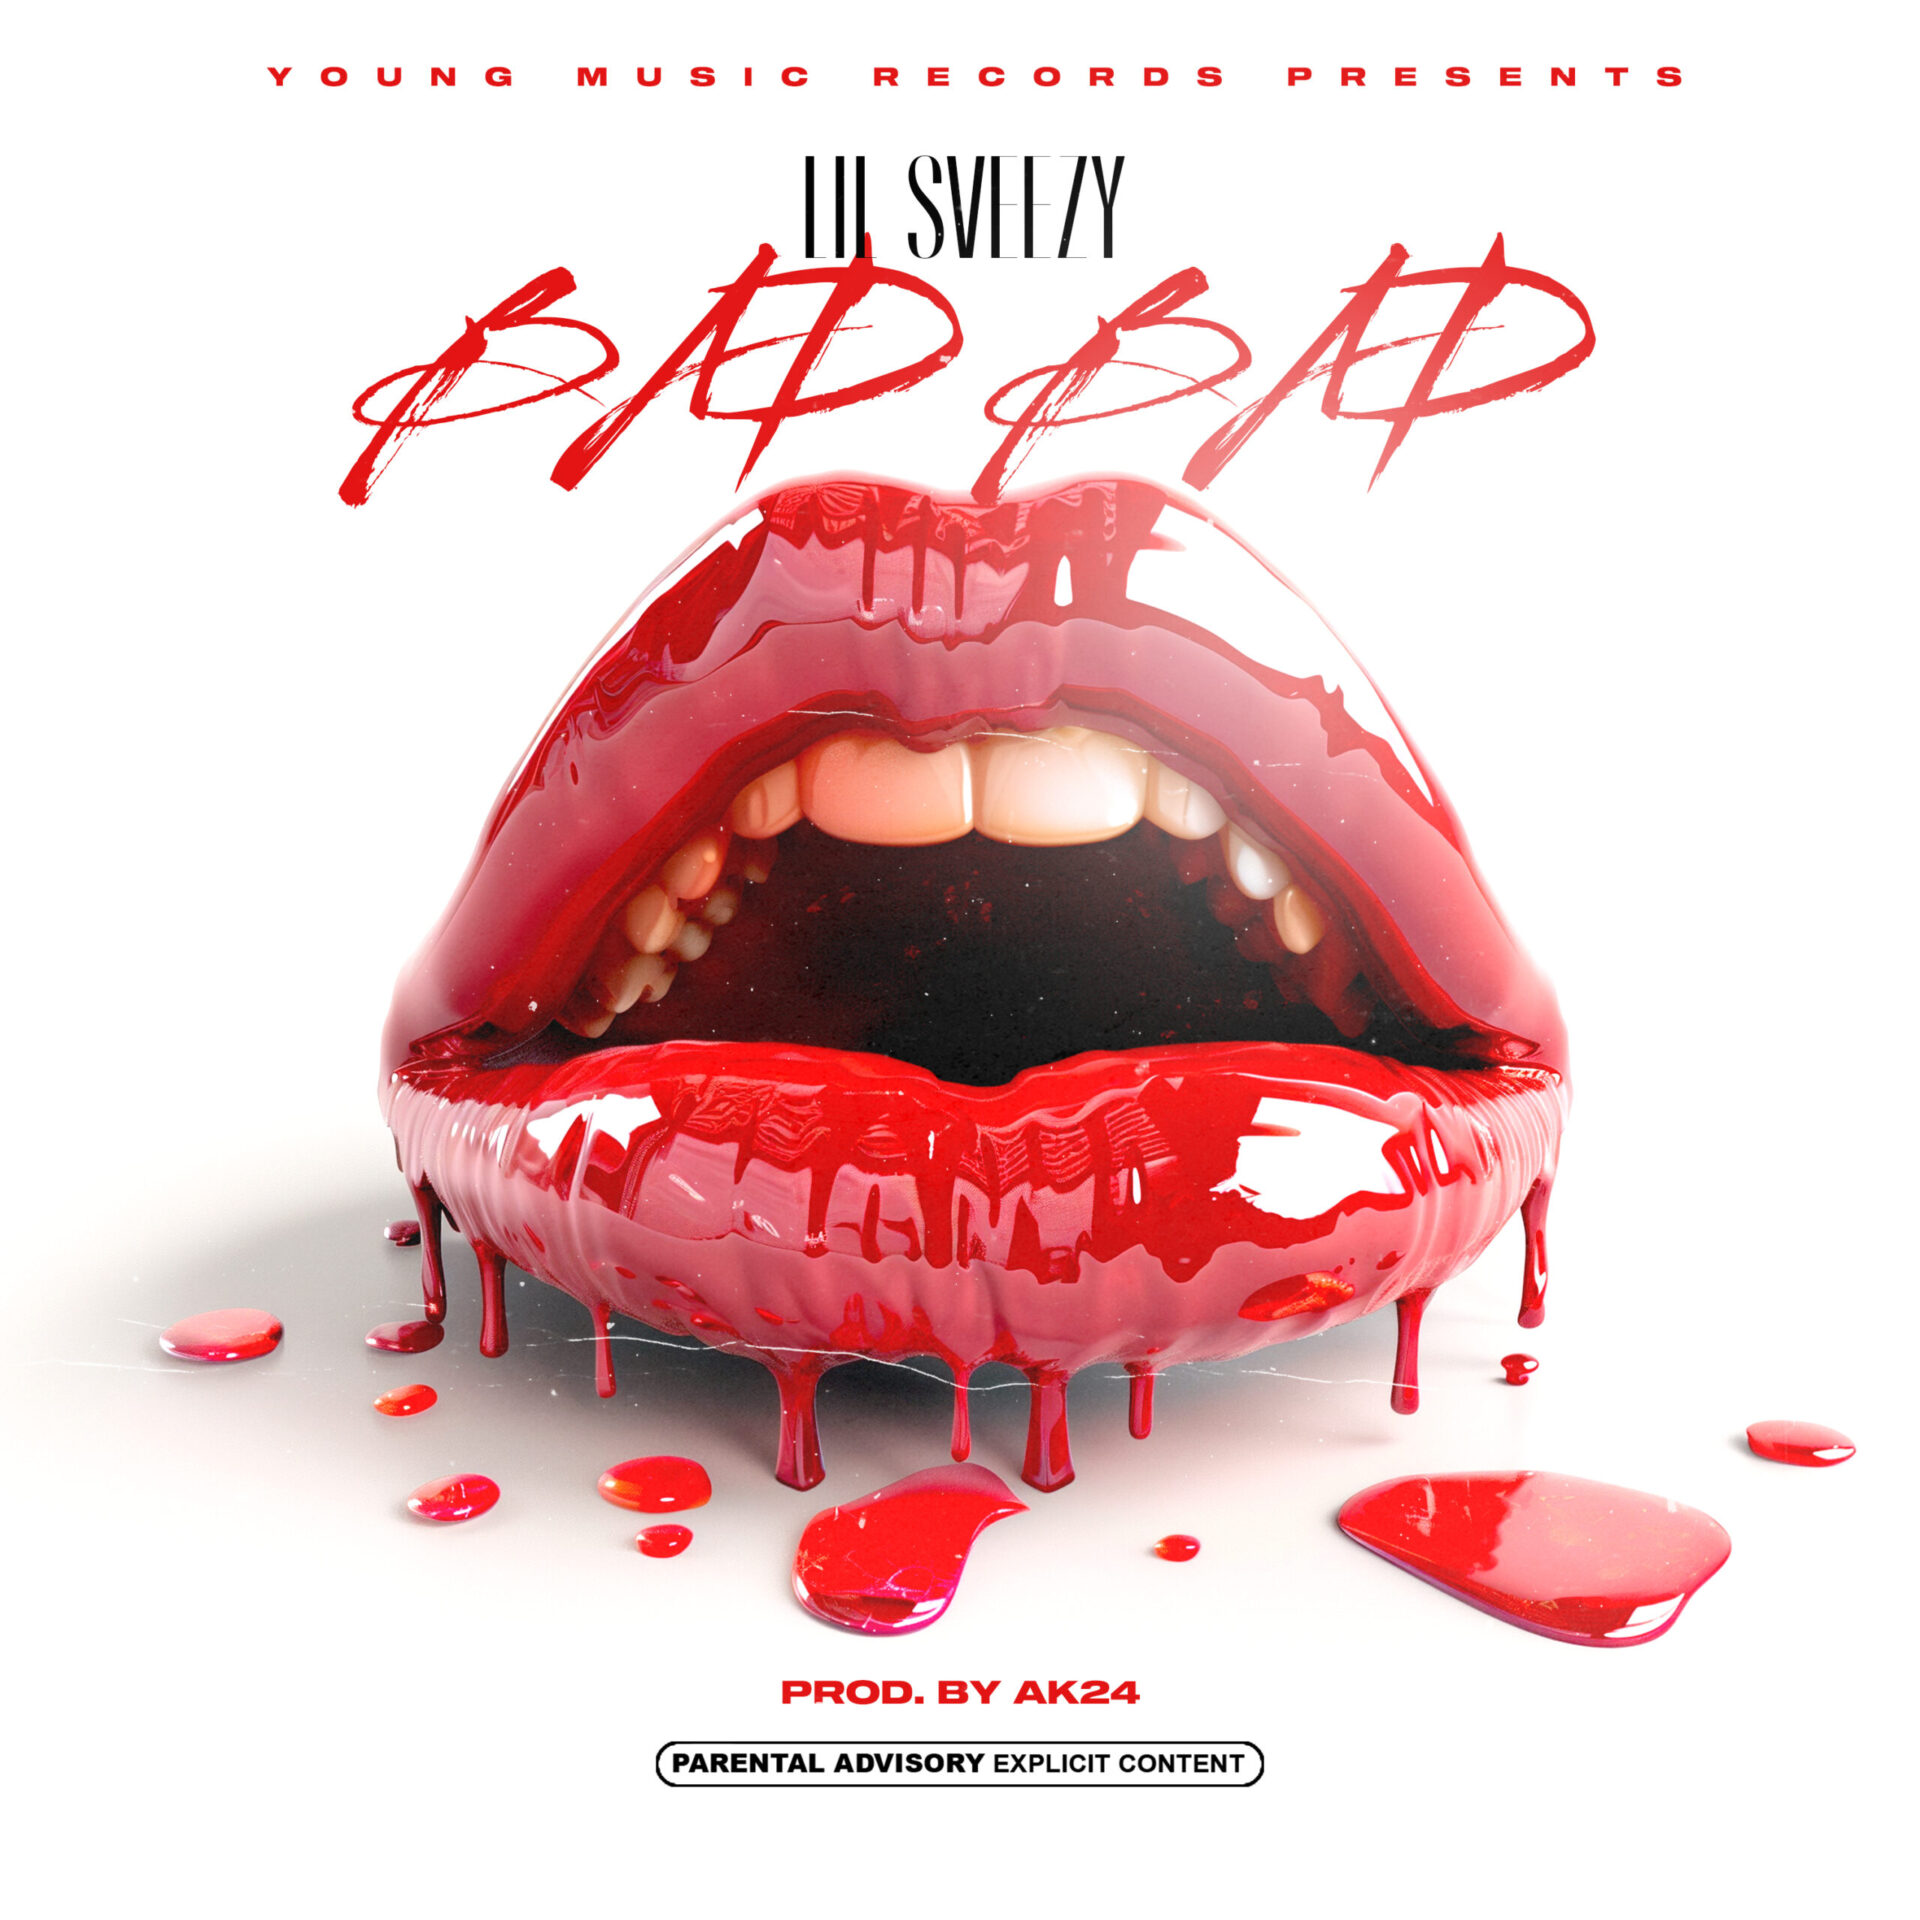 Bad Bad by Lil Sveezy song cover art